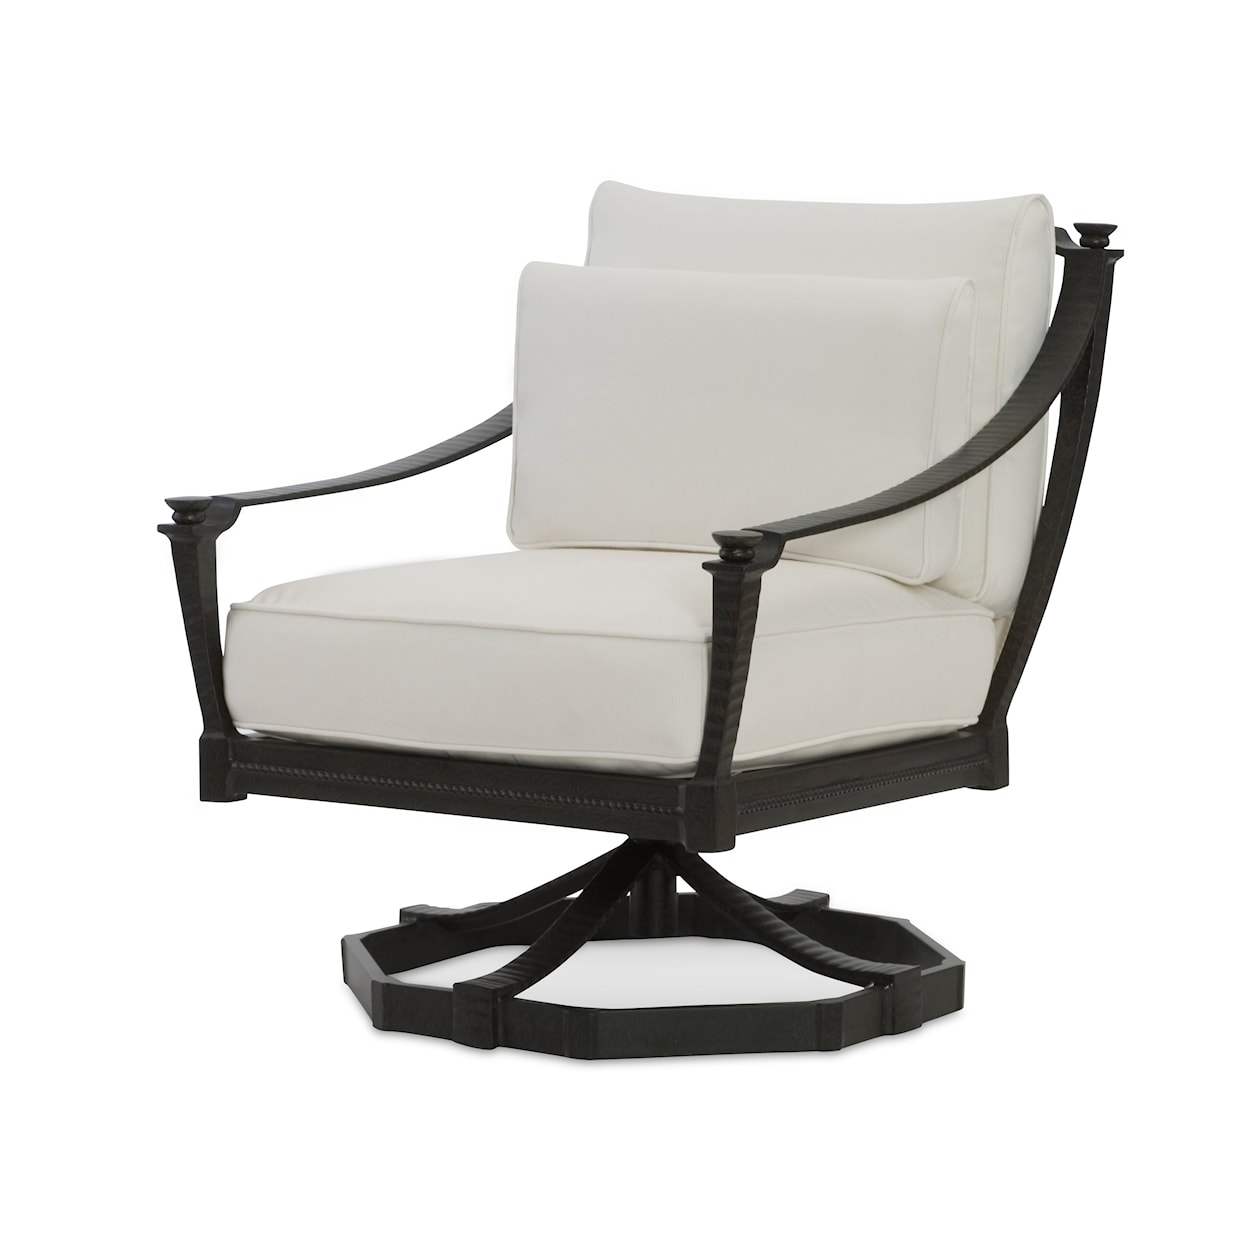 Century Andalusia Outdoor Swivel Rocker Chair